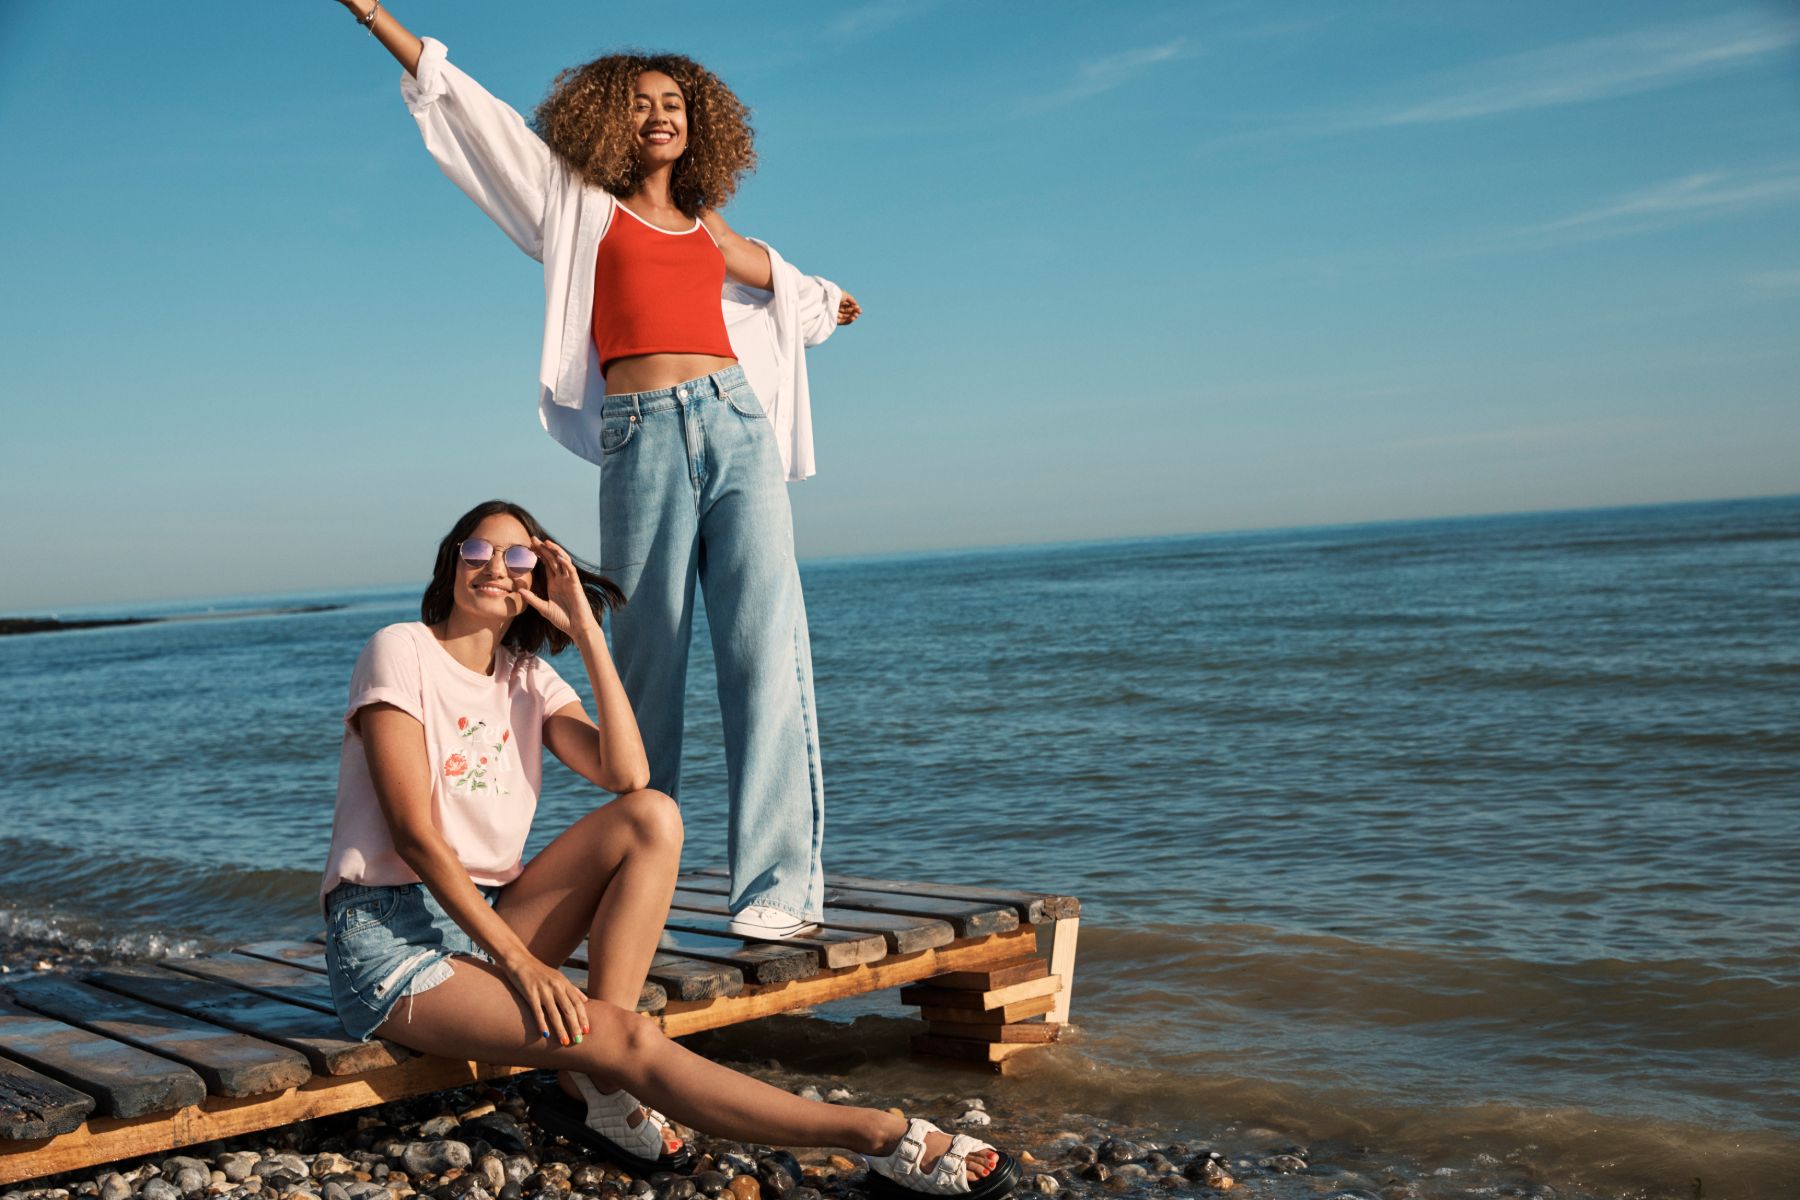 Summer 2021 Campaign by New Look